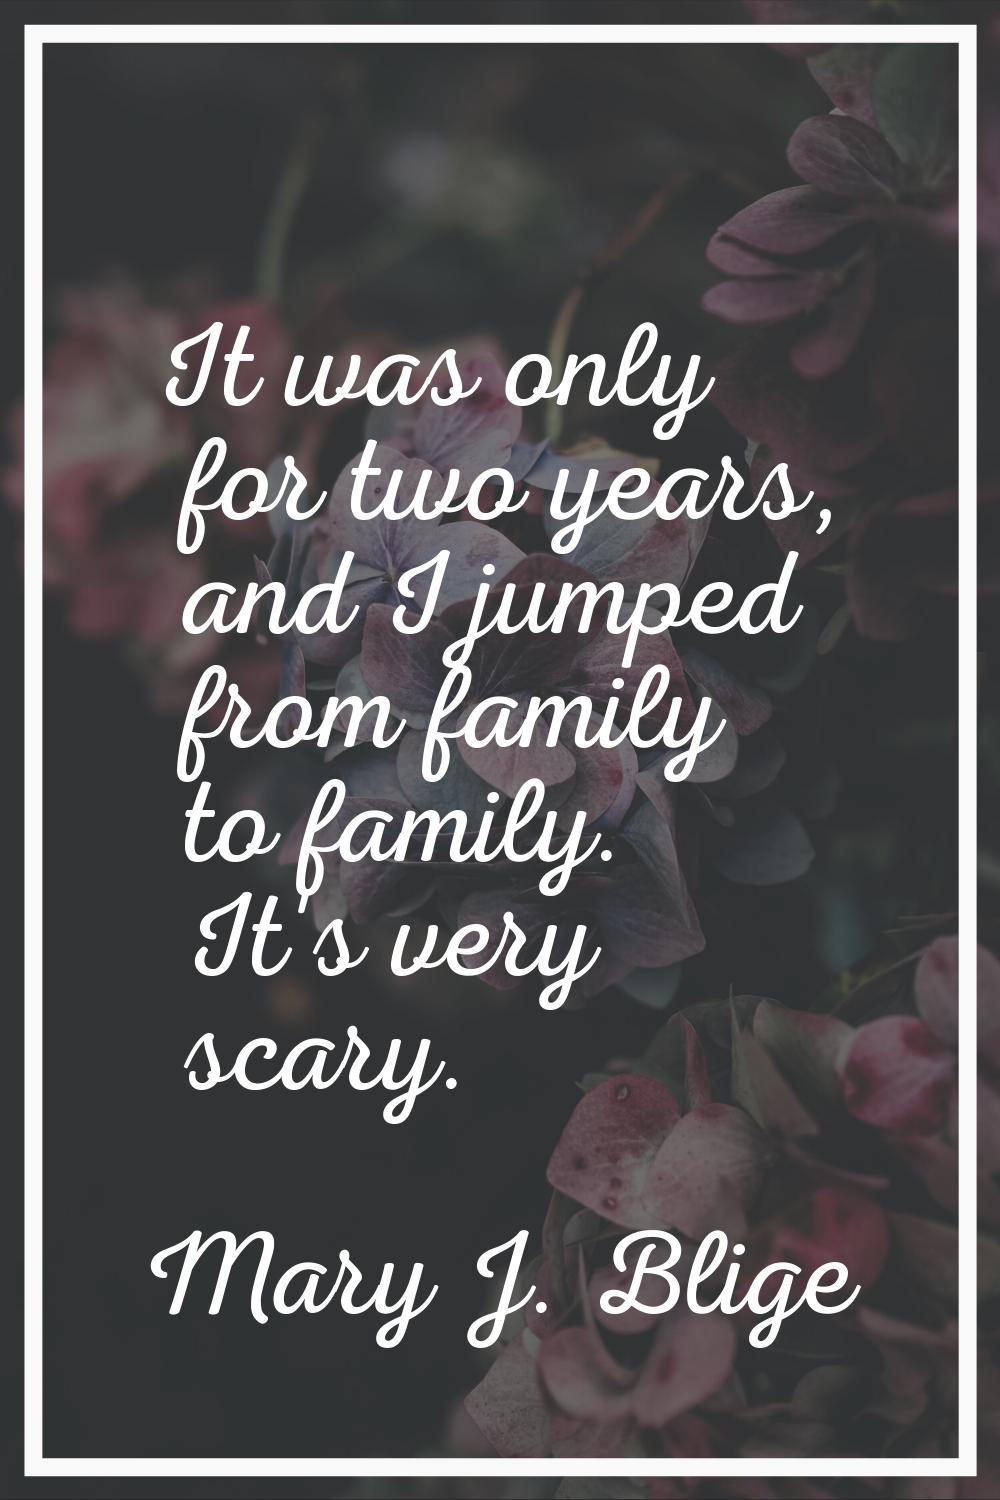 It was only for two years, and I jumped from family to family. It's very scary.